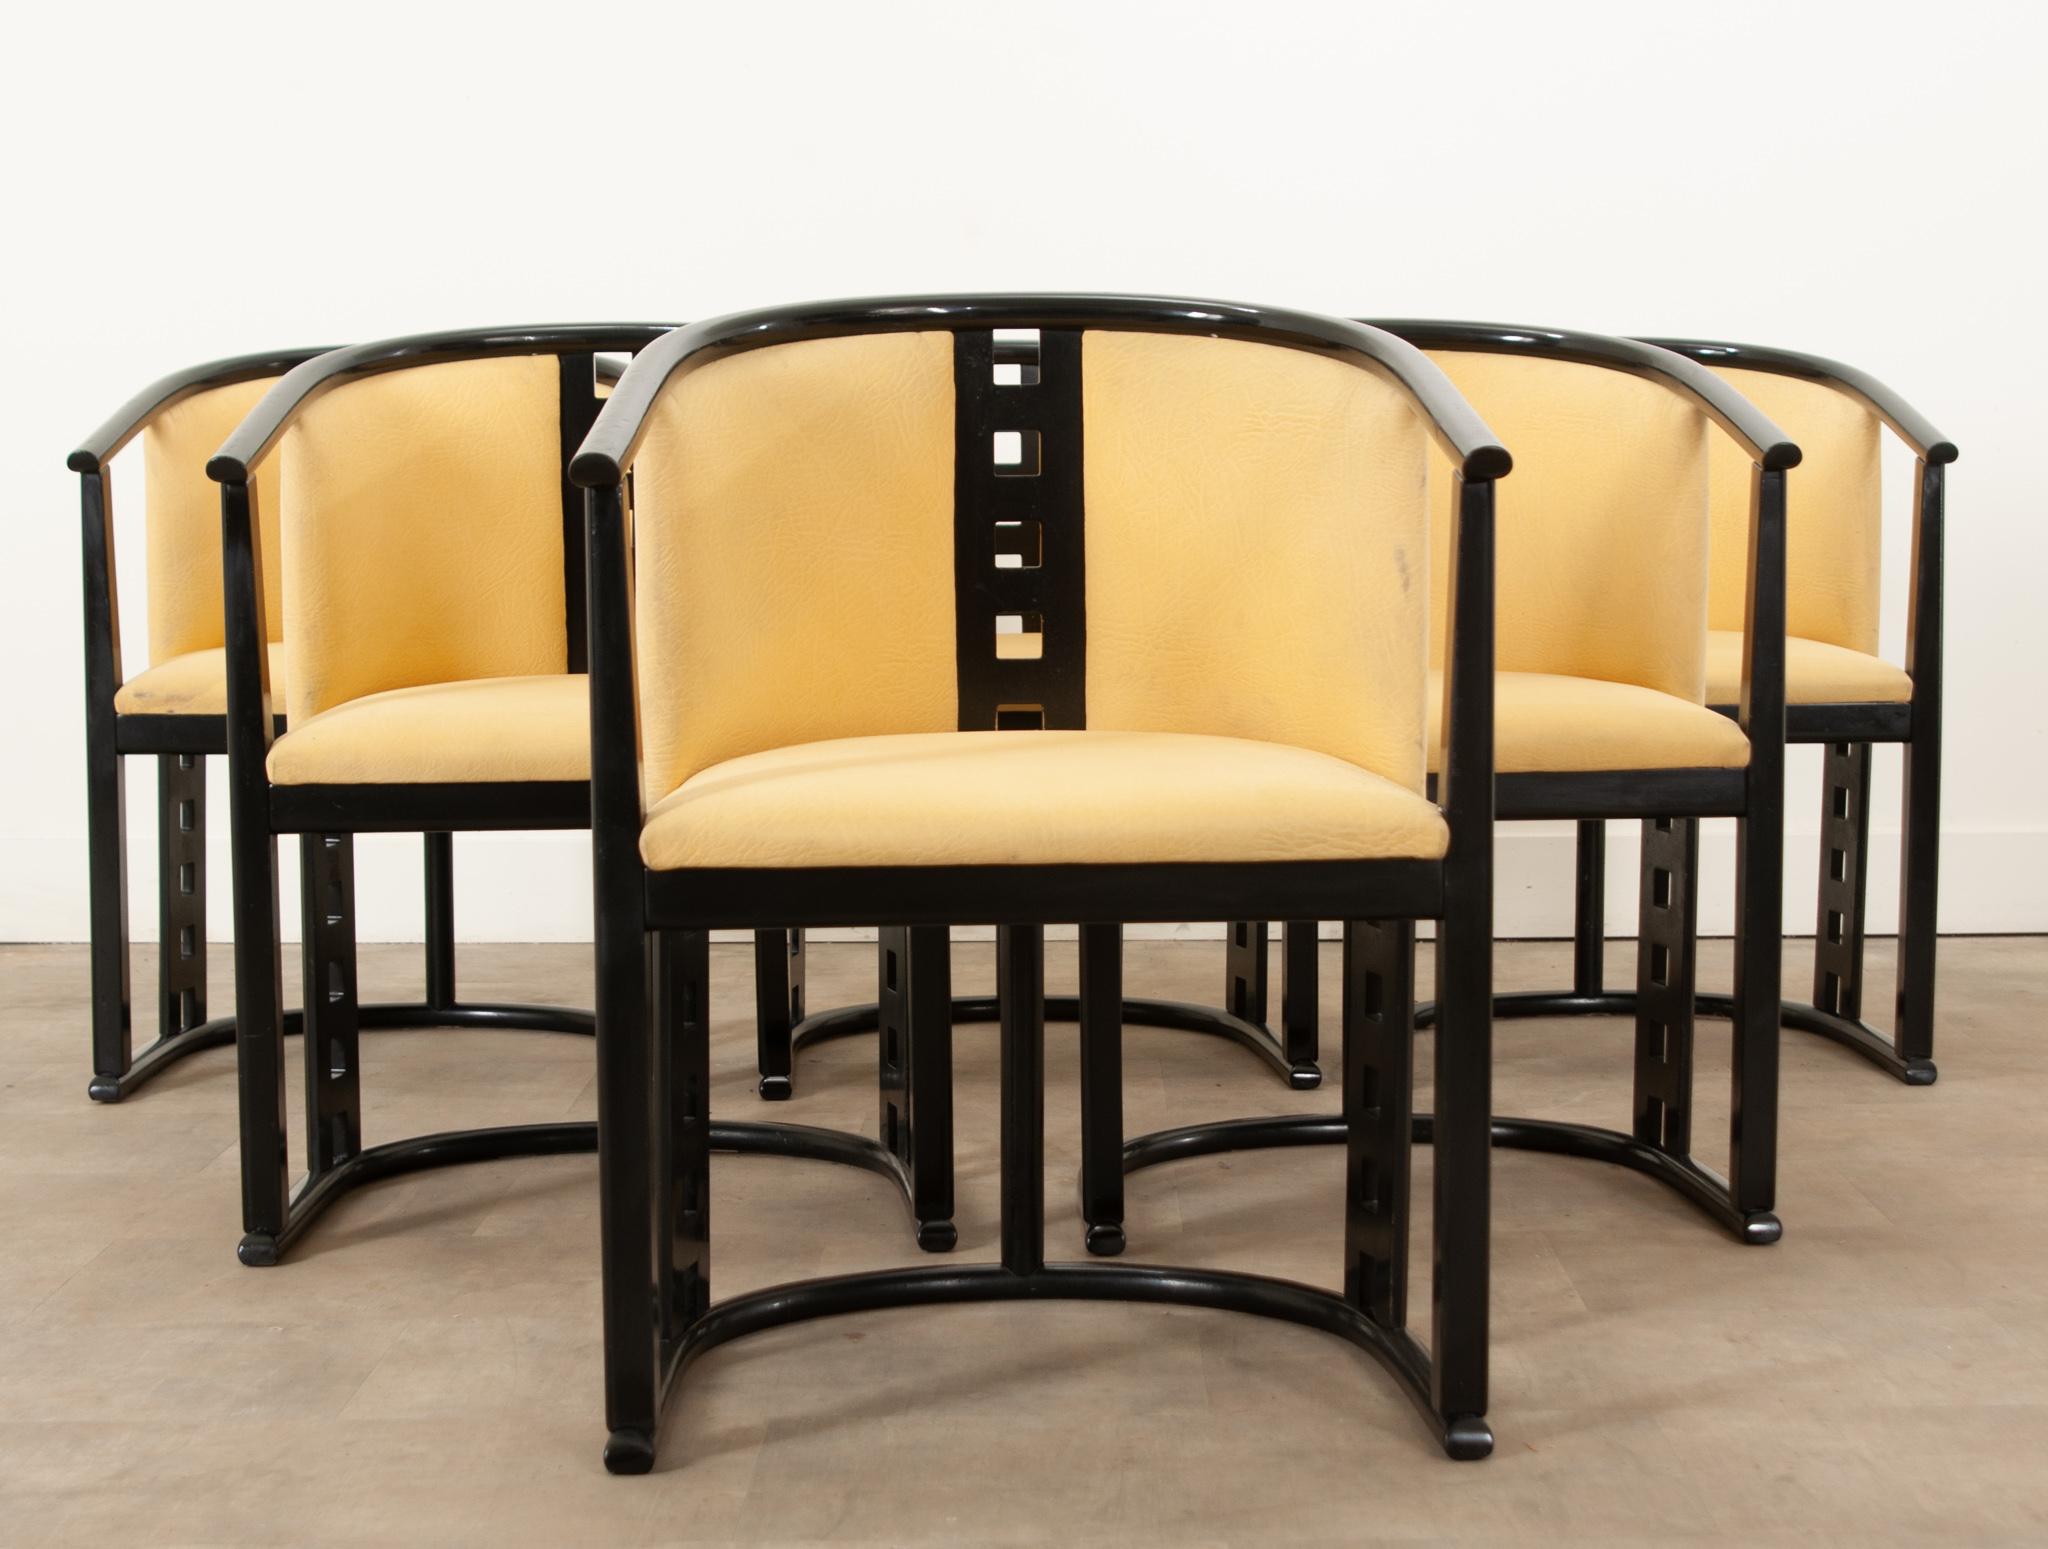 Vienna Secession Set of Six Josef Hoffmann Style Secessionist Chairs For Sale